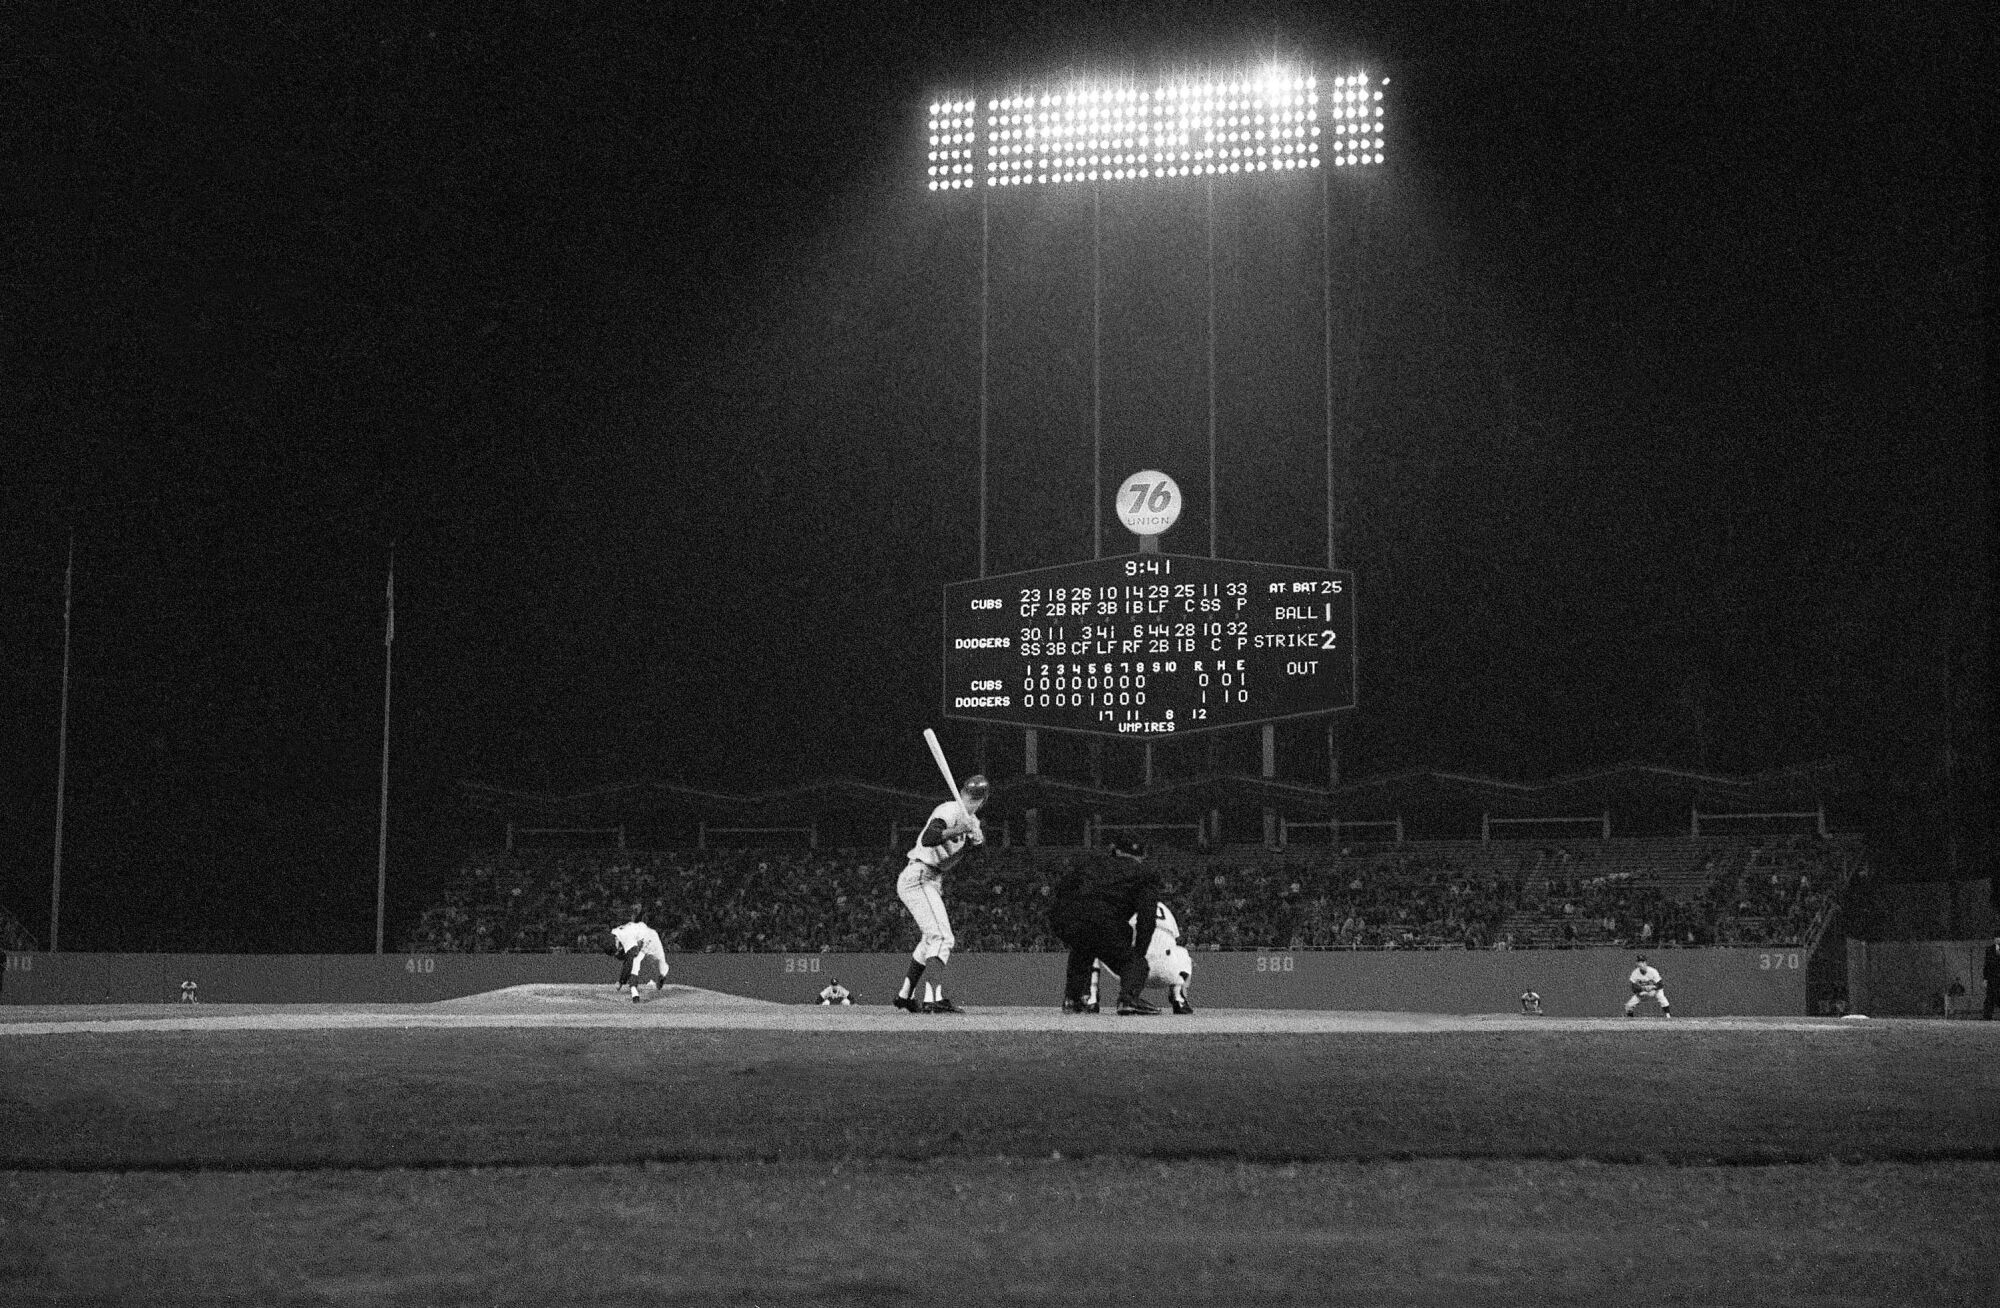 Dodgers pitcher Sandy Koufax delivers to Chicago Cubs batter Chris Krug during his perfect game on Sept. 9, 1965.